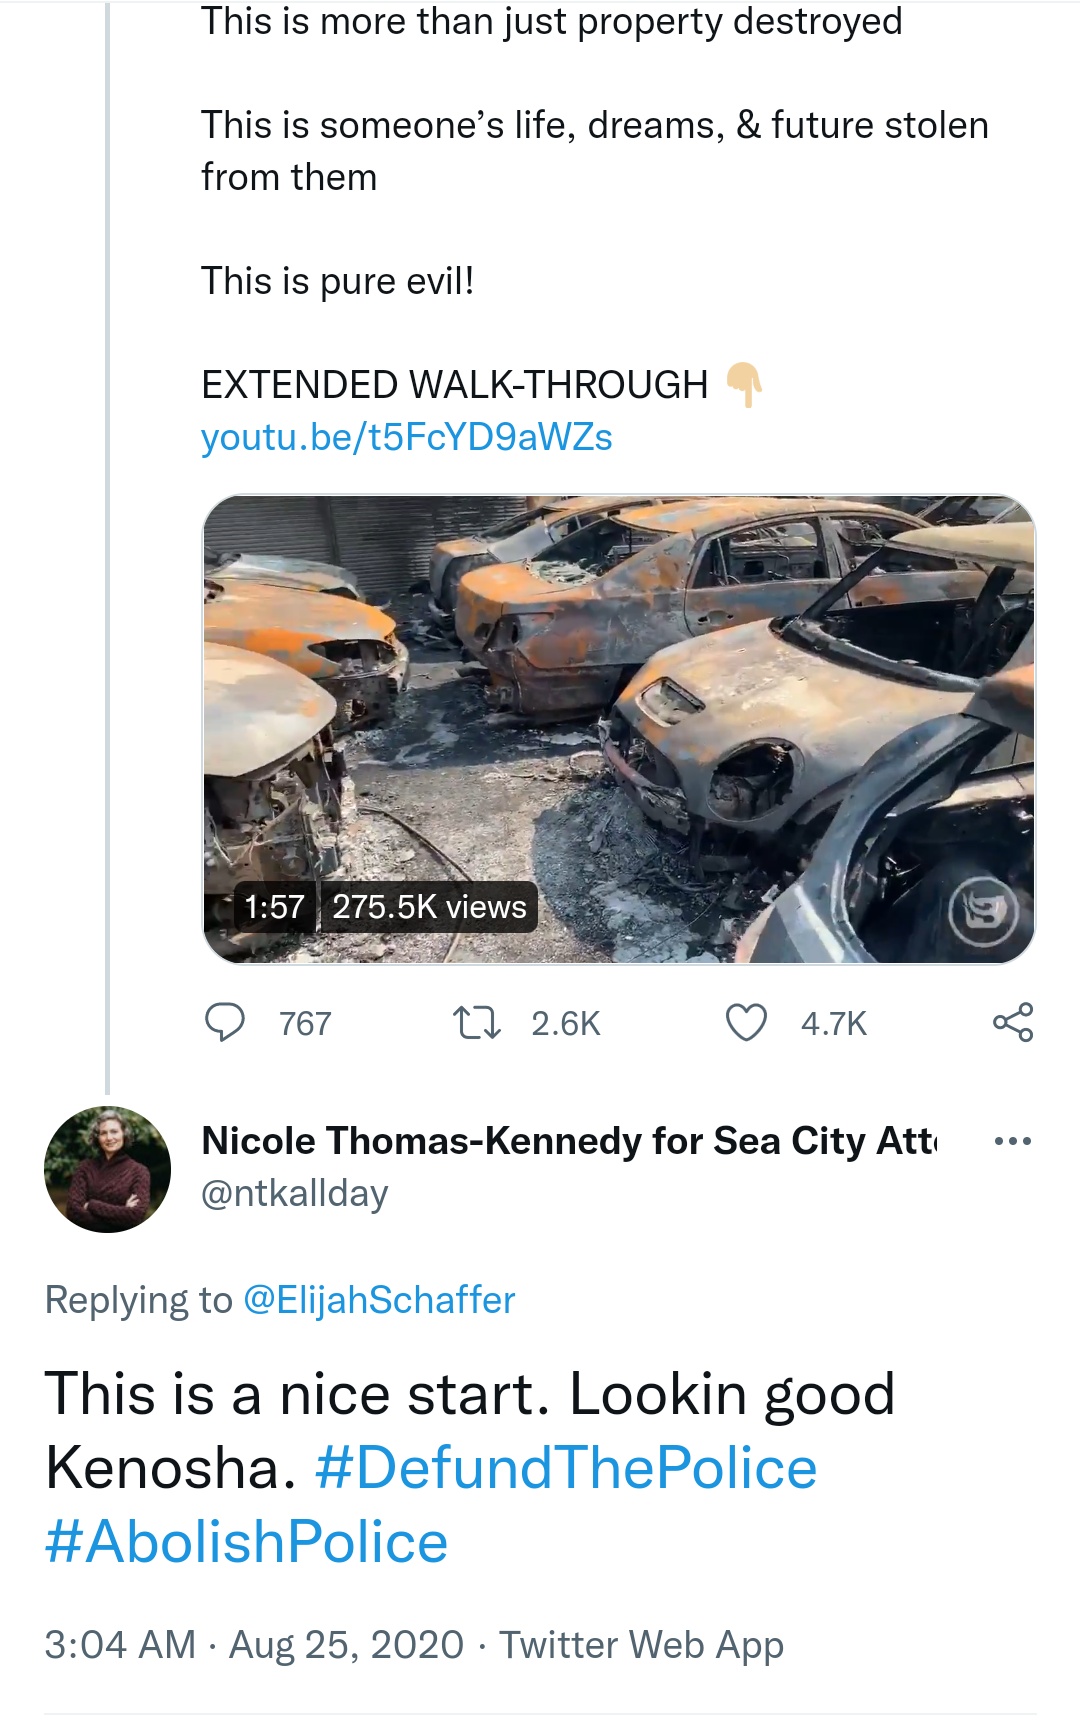 Protesters burning tens of cars is "a nice start" for Nicole Thomas-Kennedy, implying more destruction is needed.